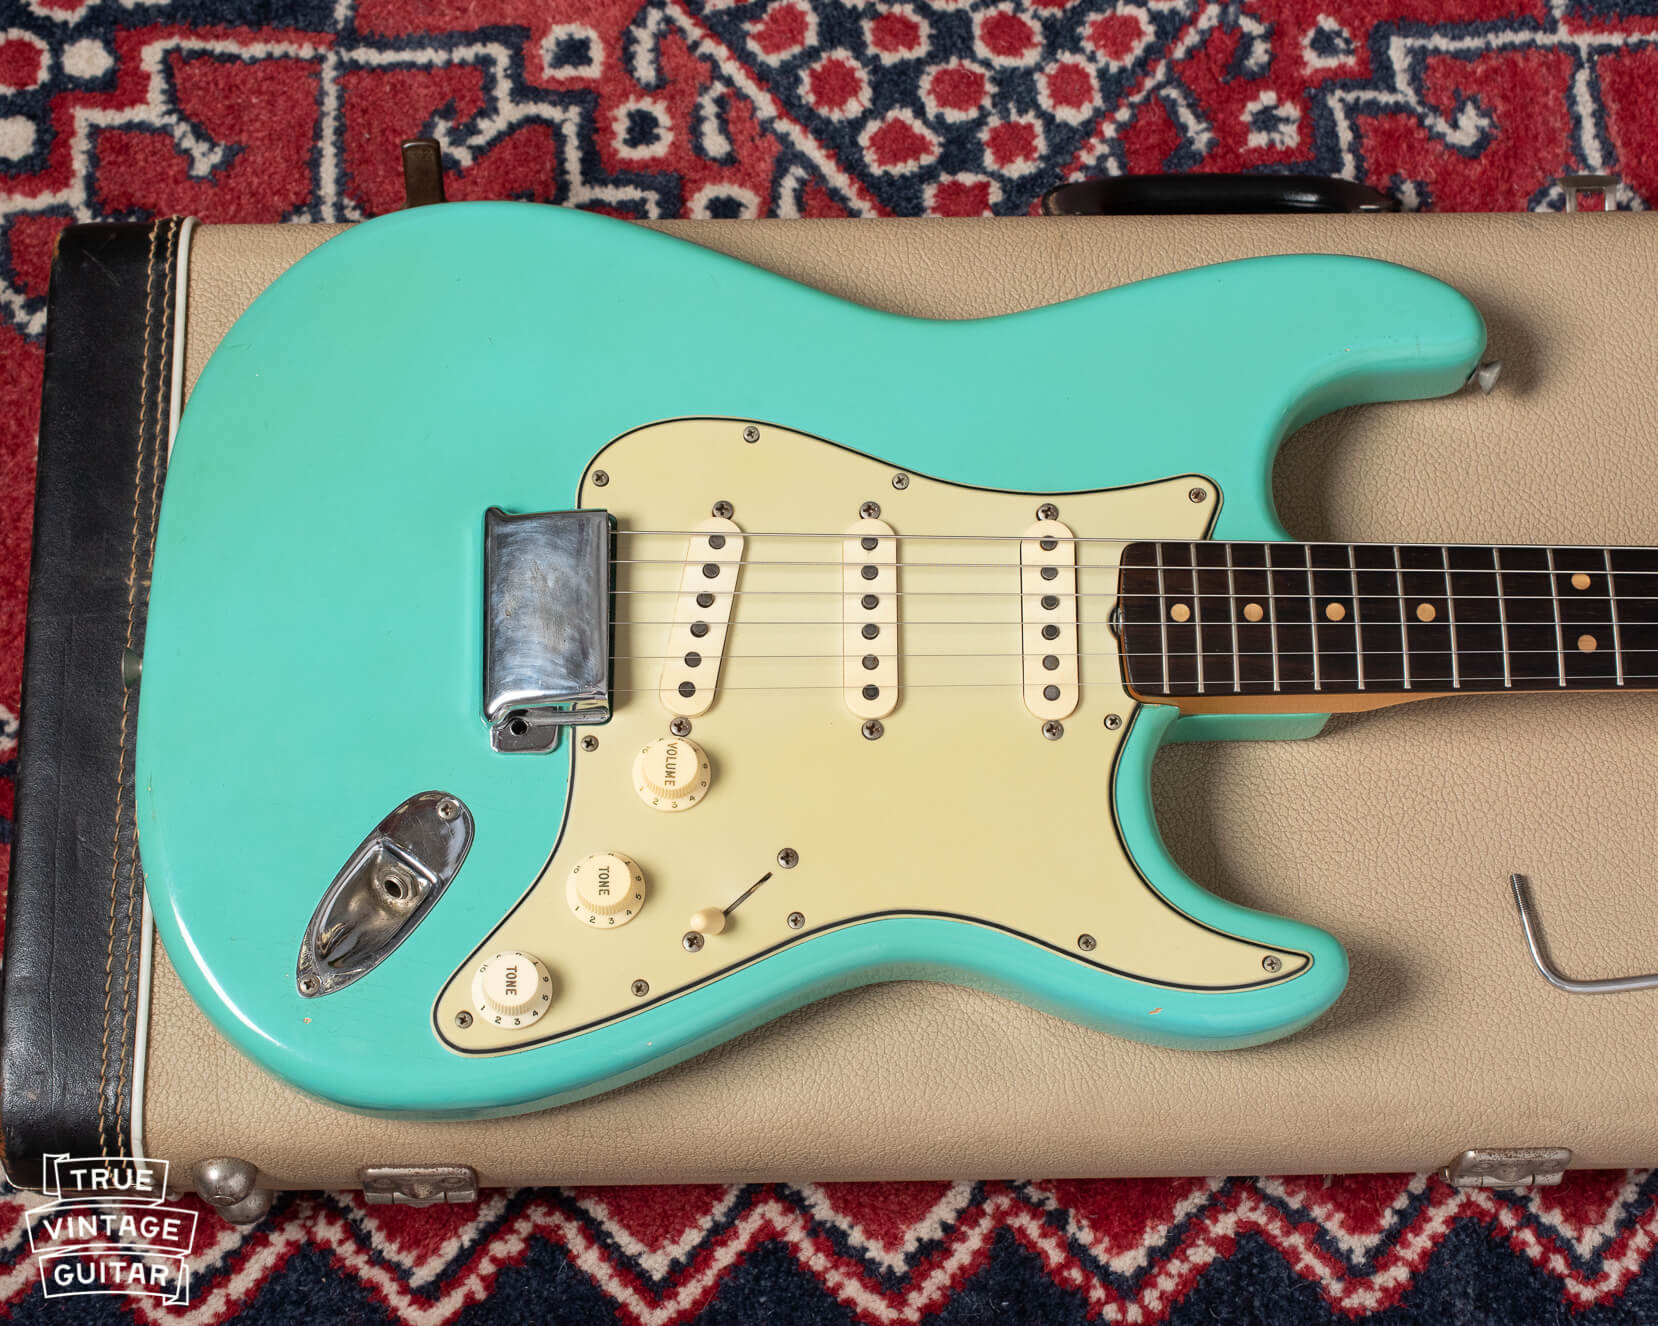 Vintage Fender Stratocaster with light blue green finish called Foam Green from 1964